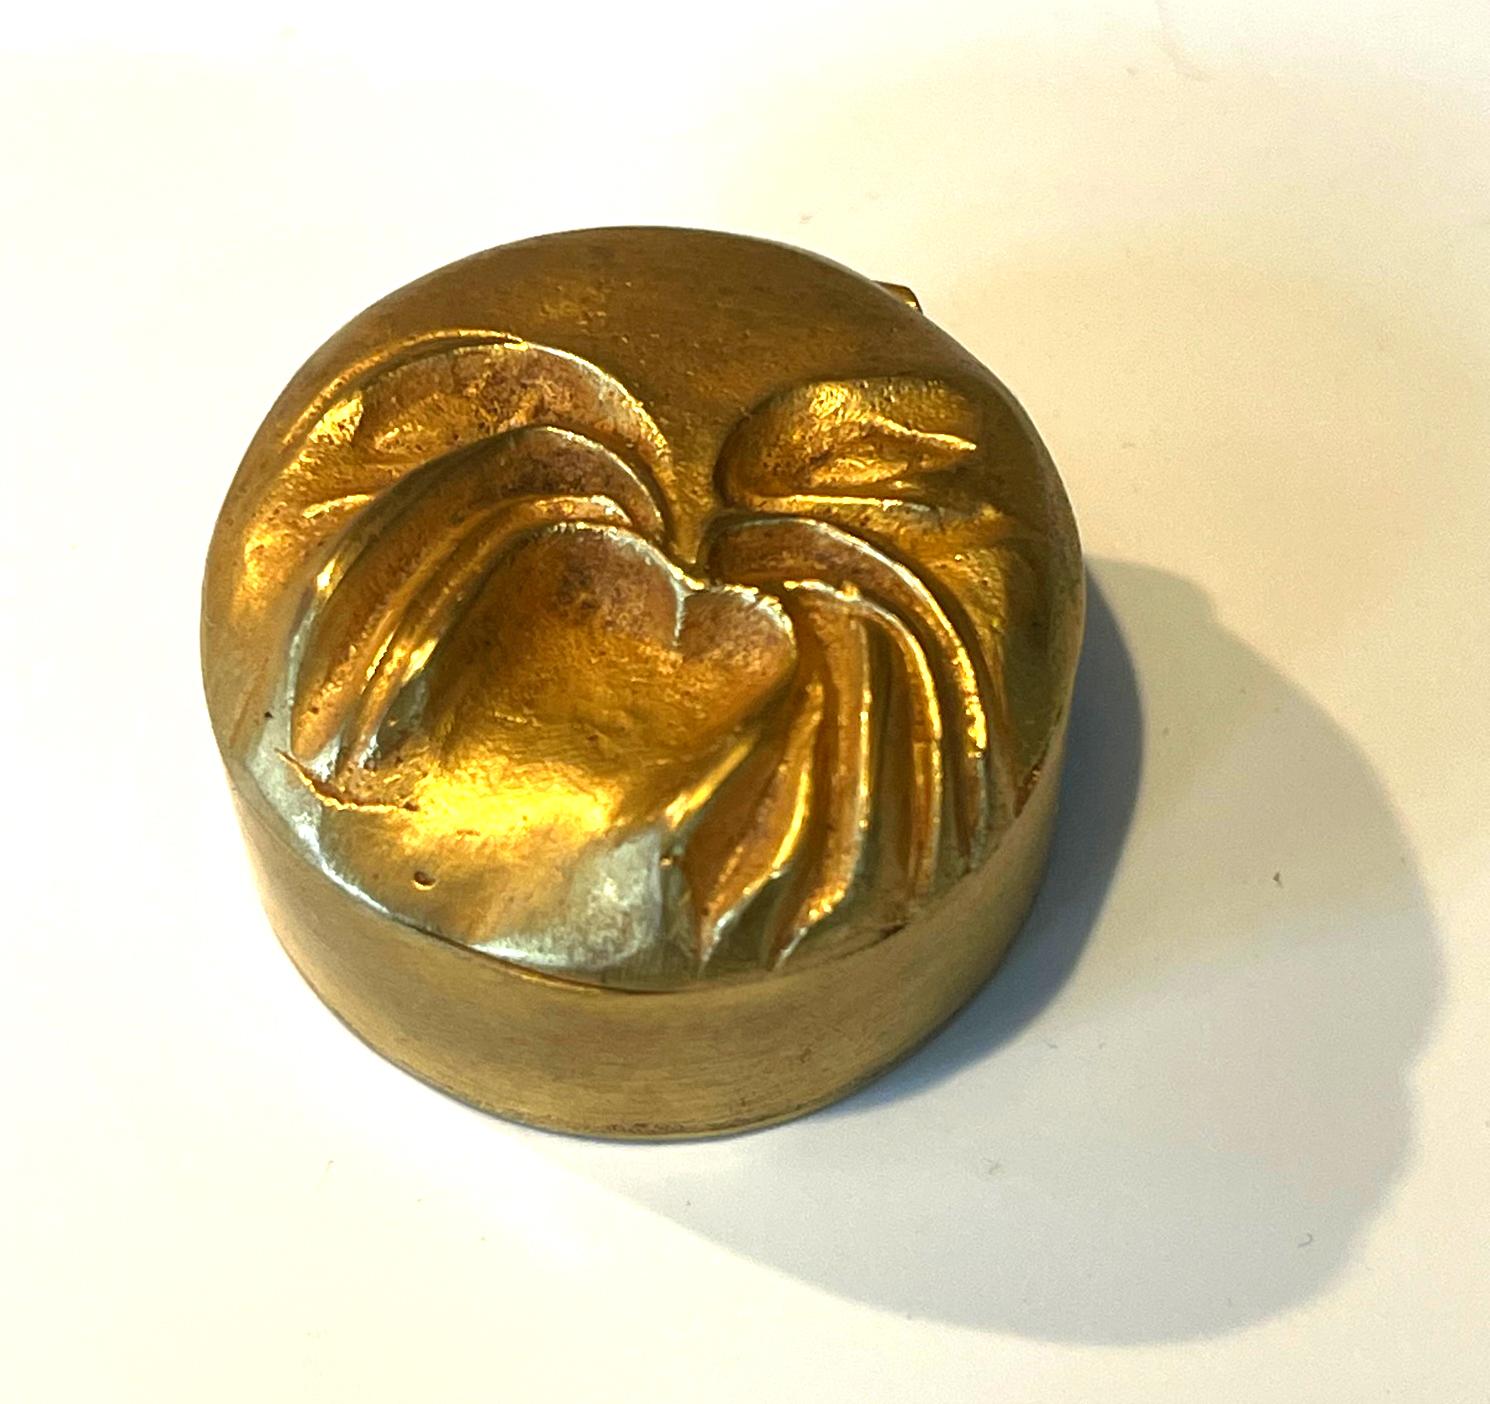 A small gilt bronze pill box by French Parisian art jeweler Line Vautrin (1913-1997) circa 1940-50s. The rather rare round box features a relief-cast spider on the lid. The interior retains the cork lining likely original. The base is marked 